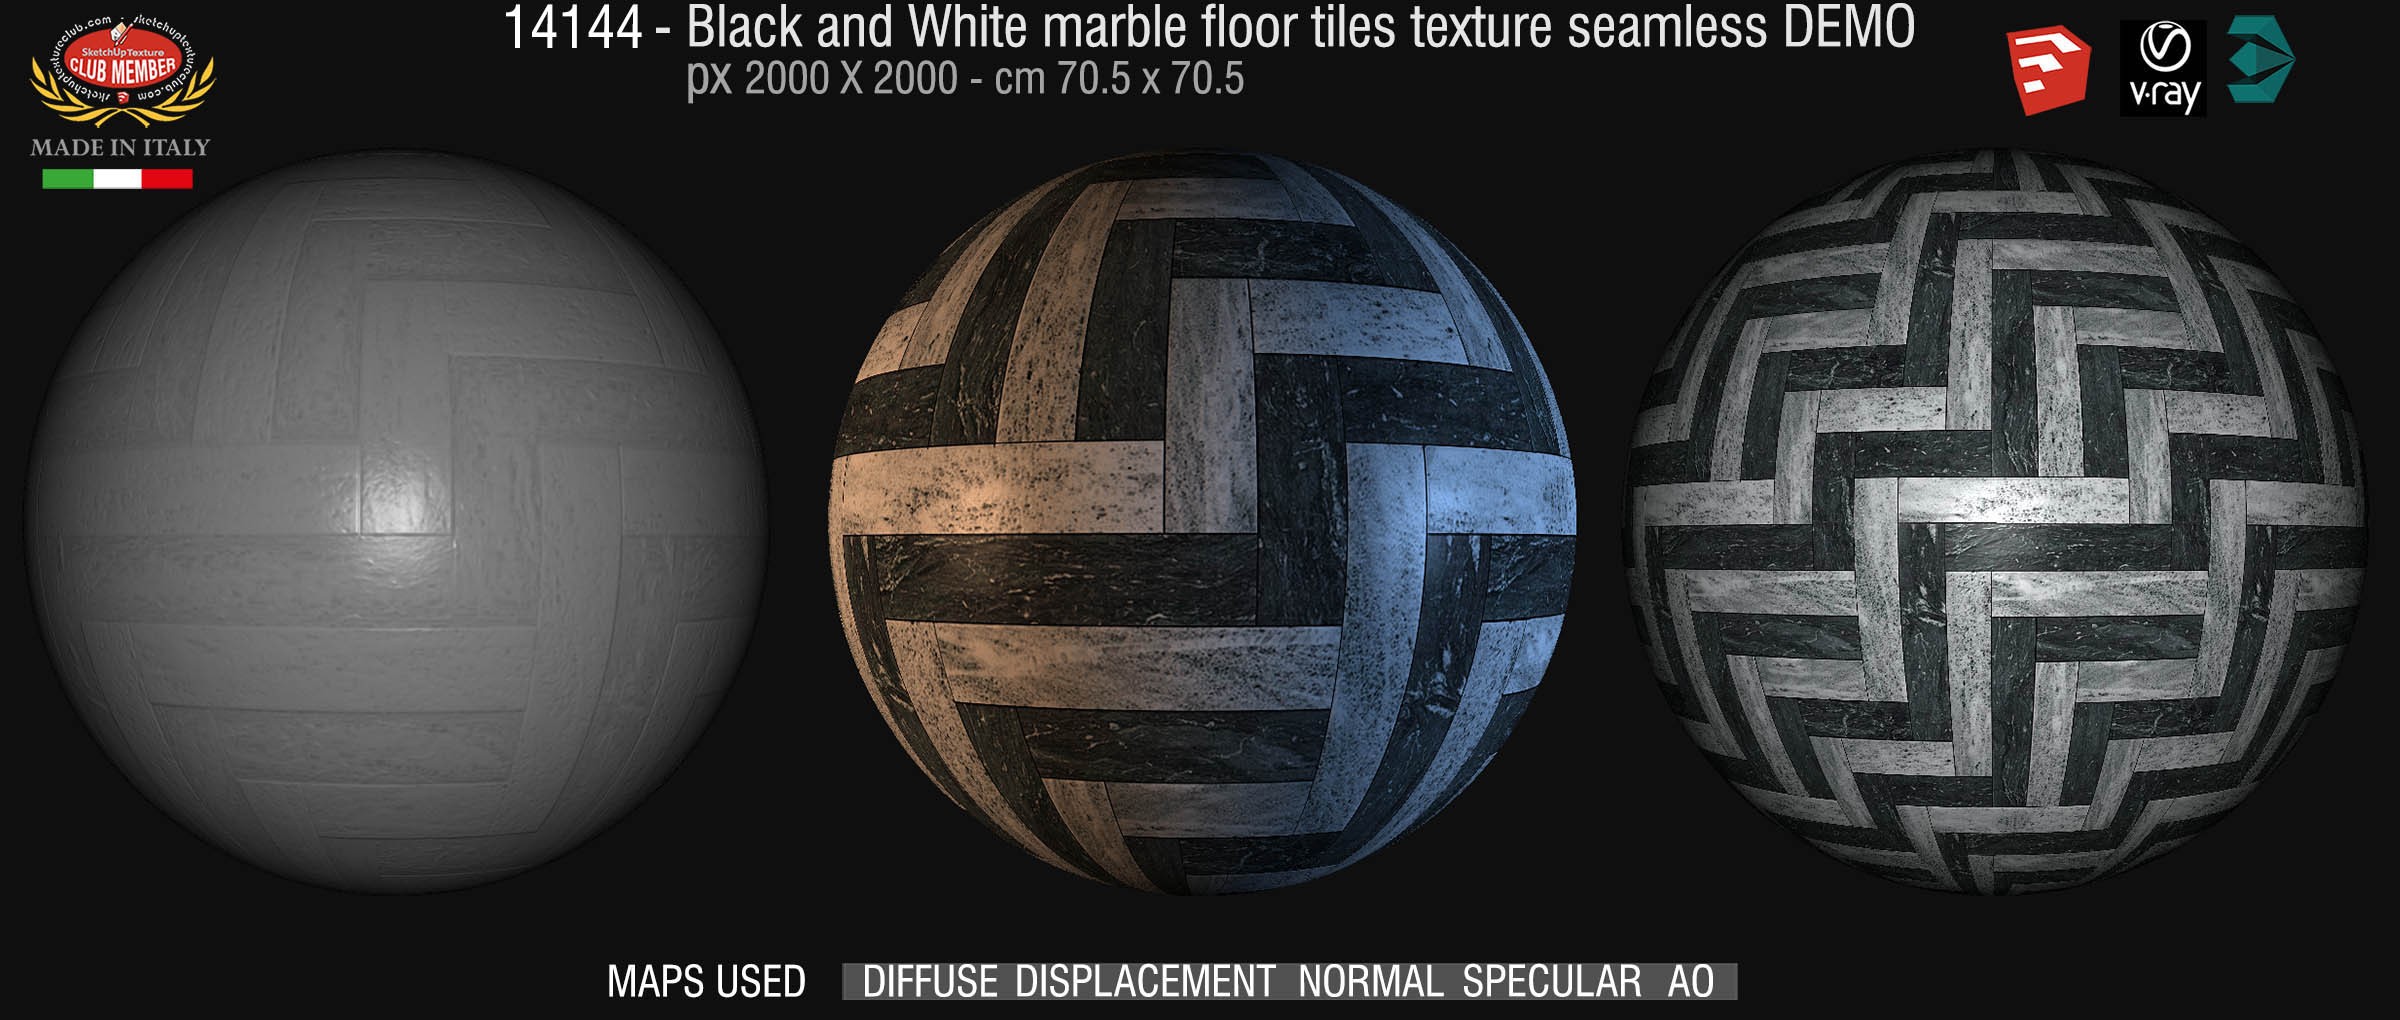 14144 Black and white marble tile texture seamless + maps DEMO